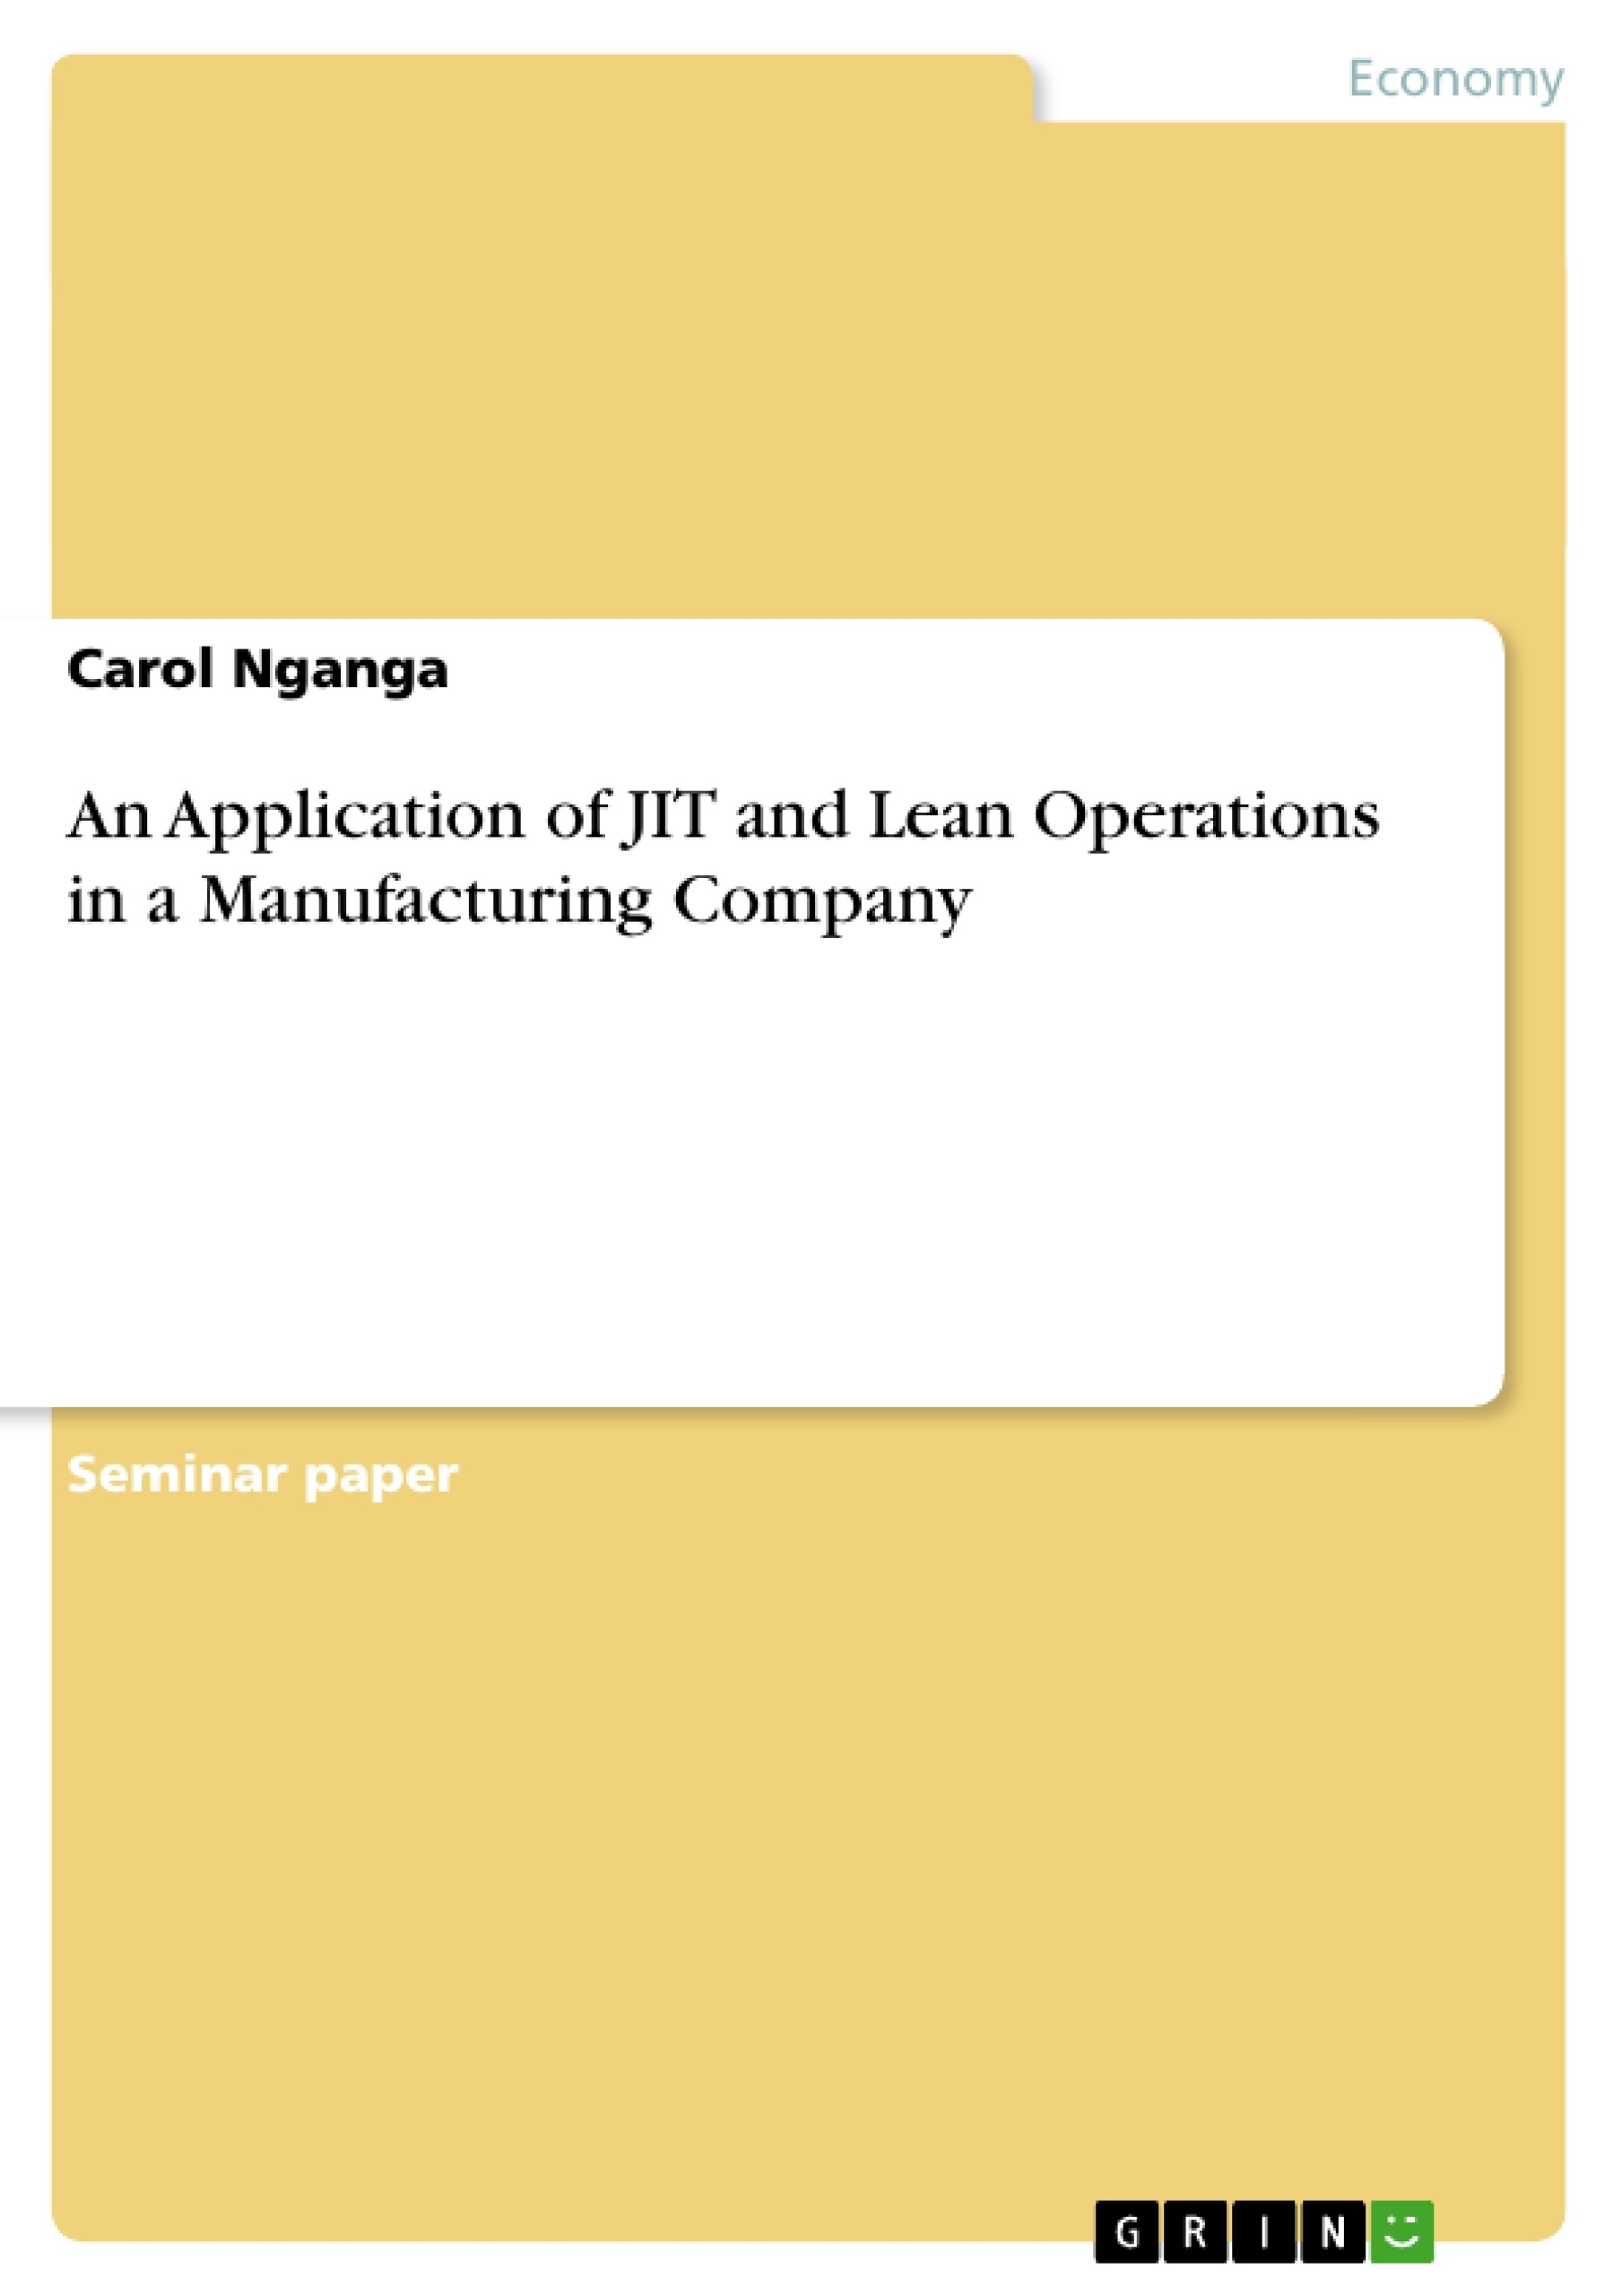 Title: An Application of JIT and Lean Operations in a Manufacturing Company